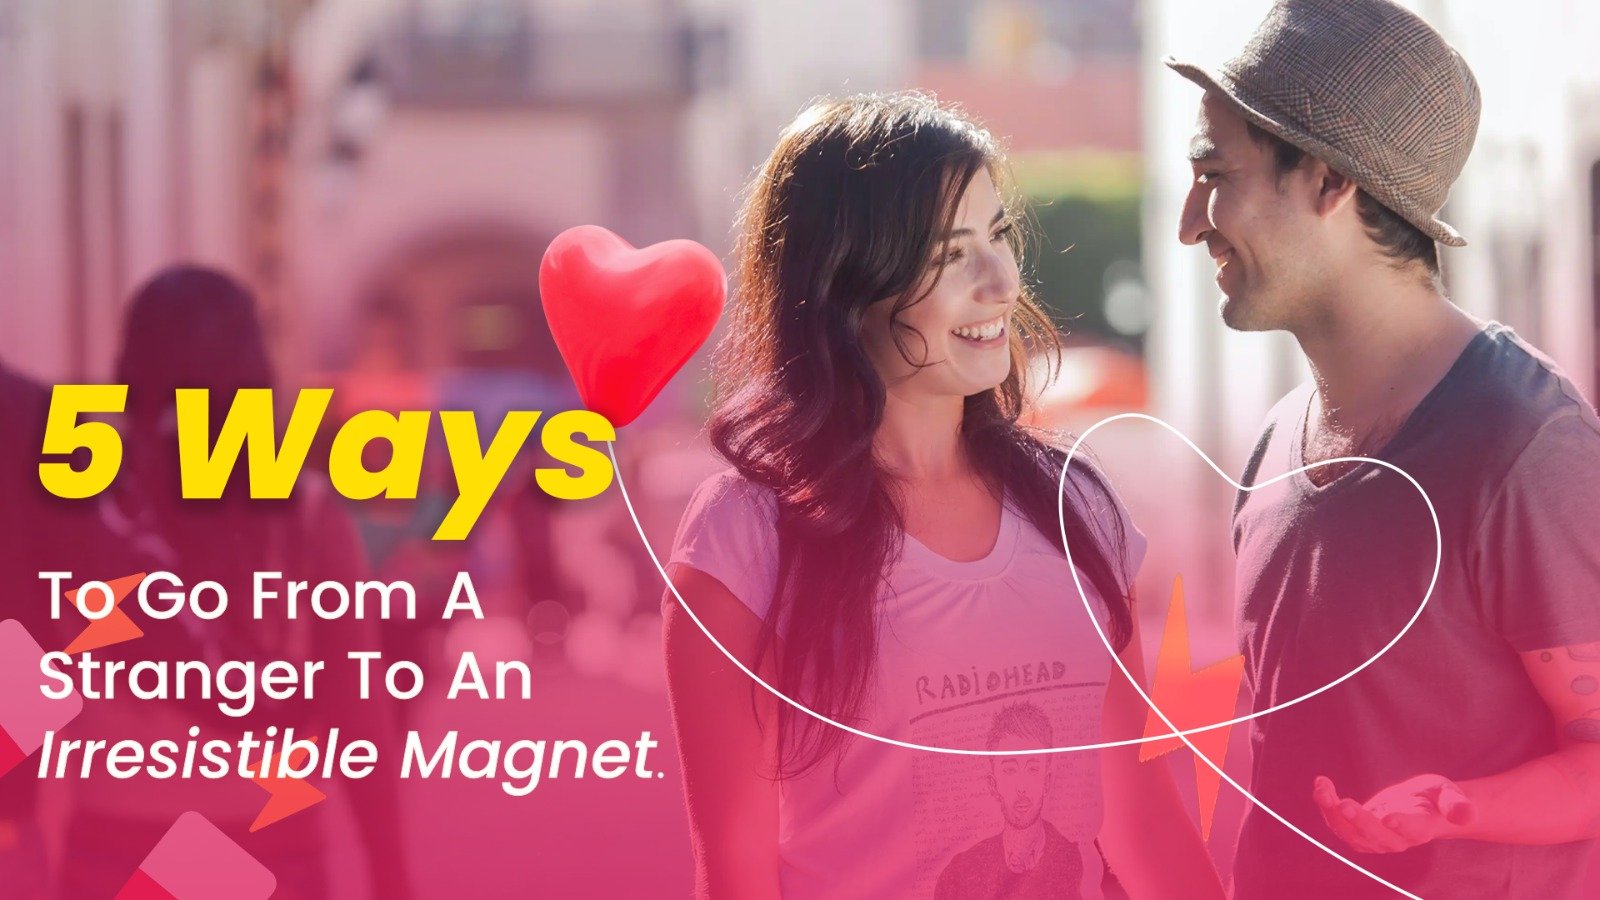 5 Ways To Go From A Stranger To An Irresistible Magnet.